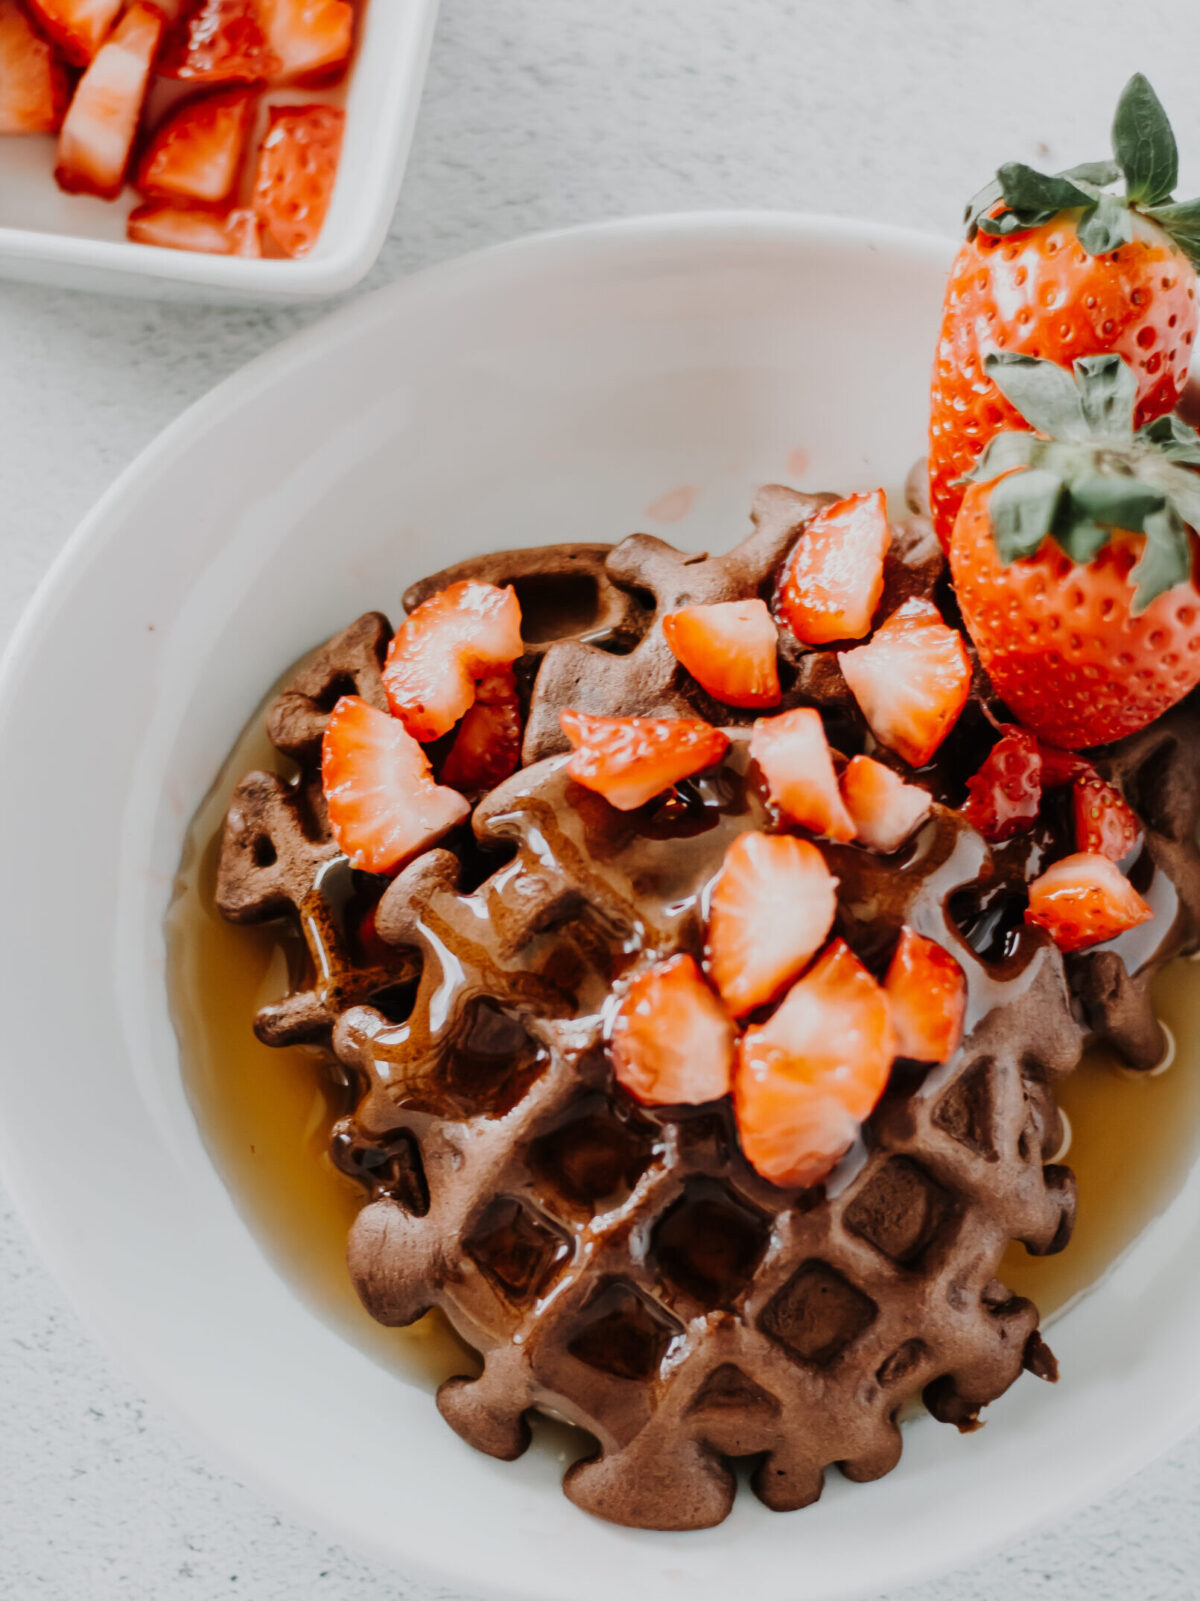 chocolate protein waffle in a shall bowl with strawberries and syrup